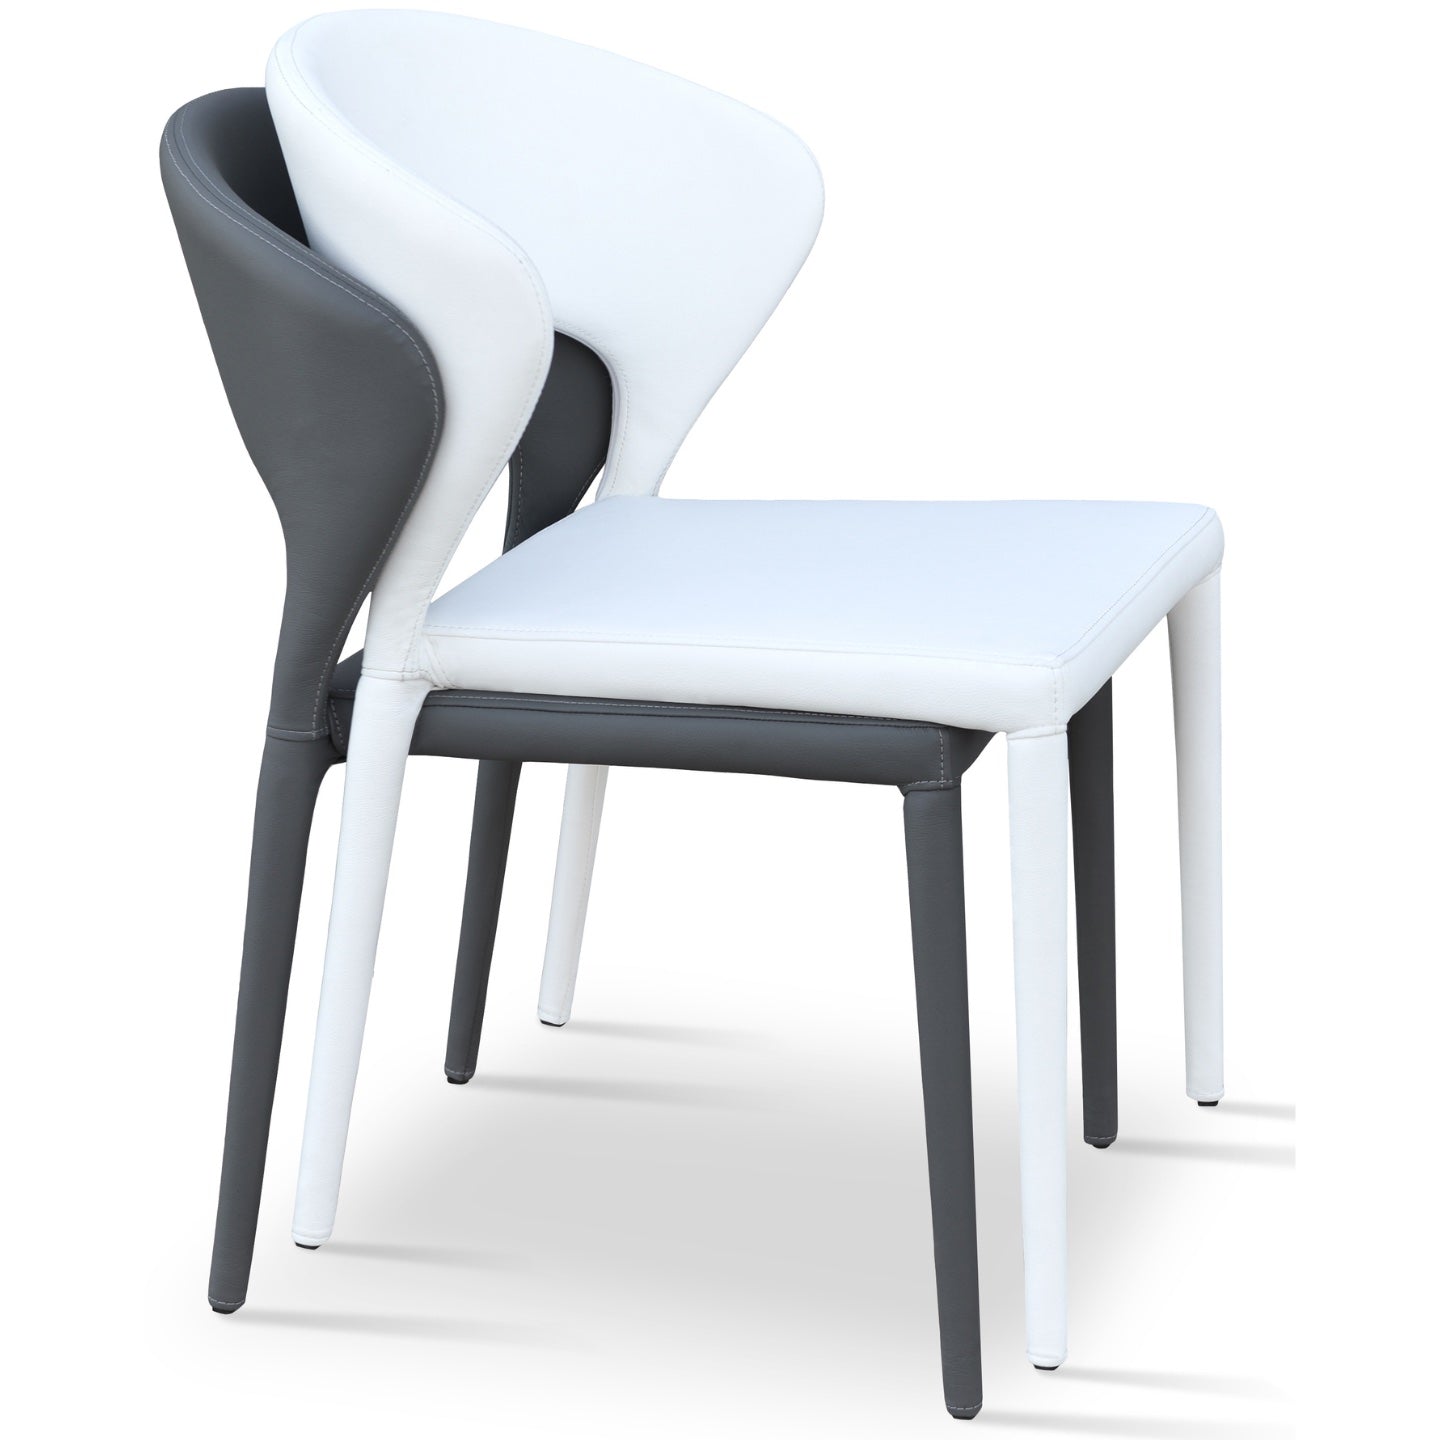 sohoConcept Kitchen & Dining Room Chairs Prada Stackable Restaurant Commercial Chairs | White Leather Metal Dining Chairs